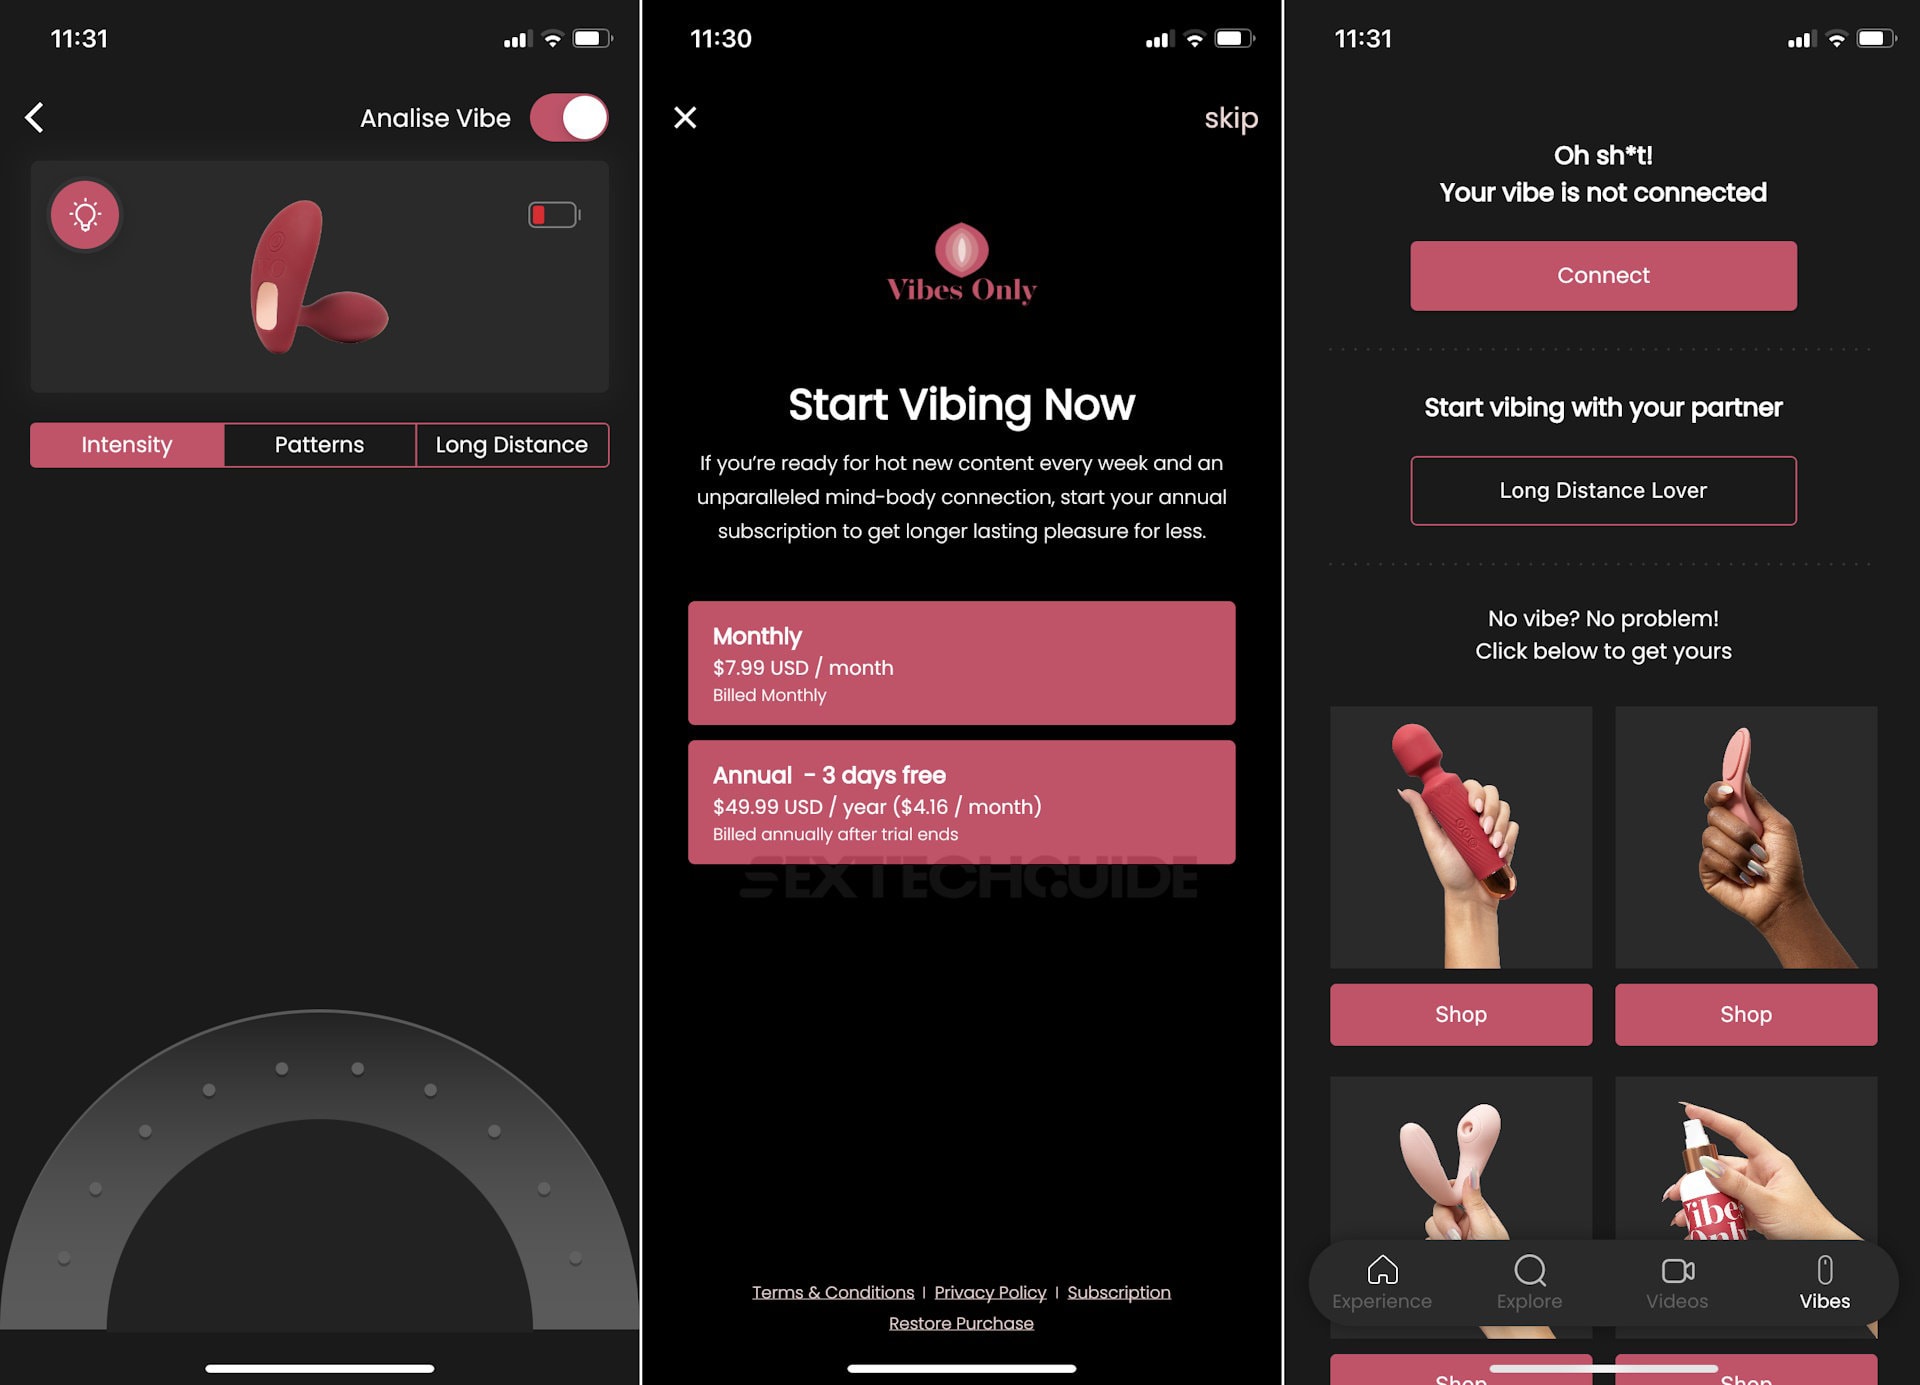 A screenshot of the app showcasing various types of sex toys, including vibrators and analise options.